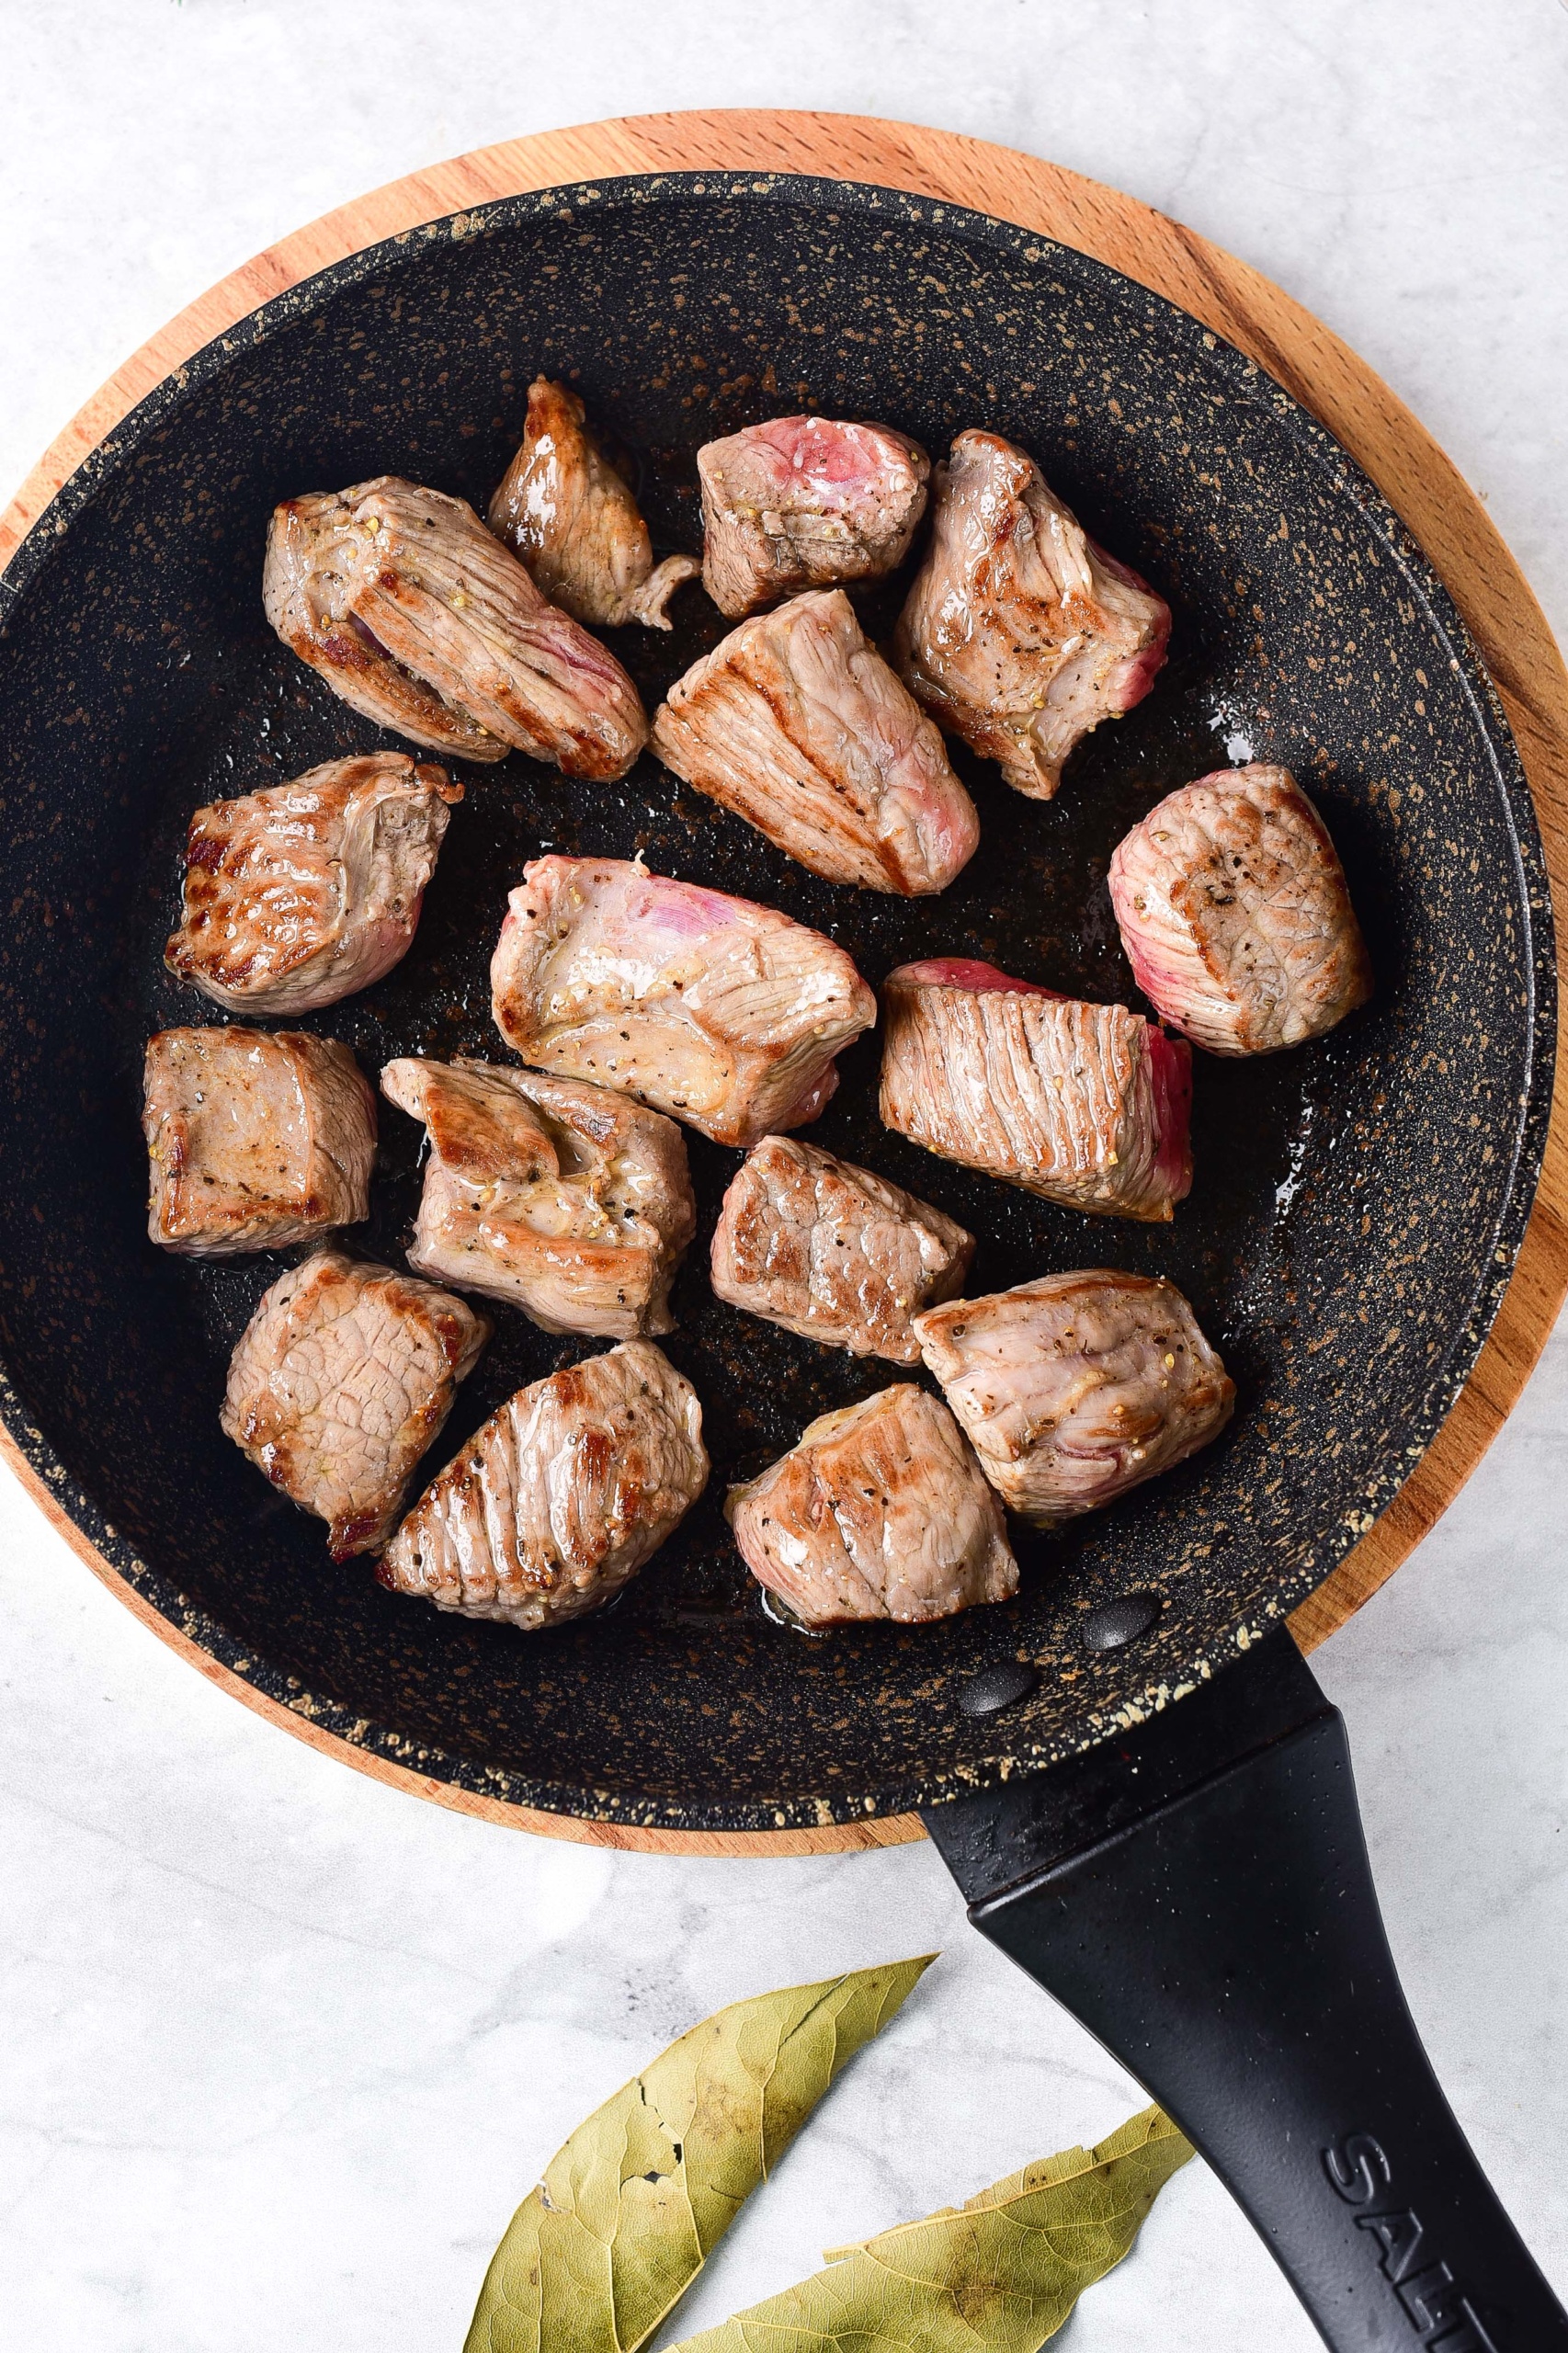 Beef cubes being seared in a skillet.